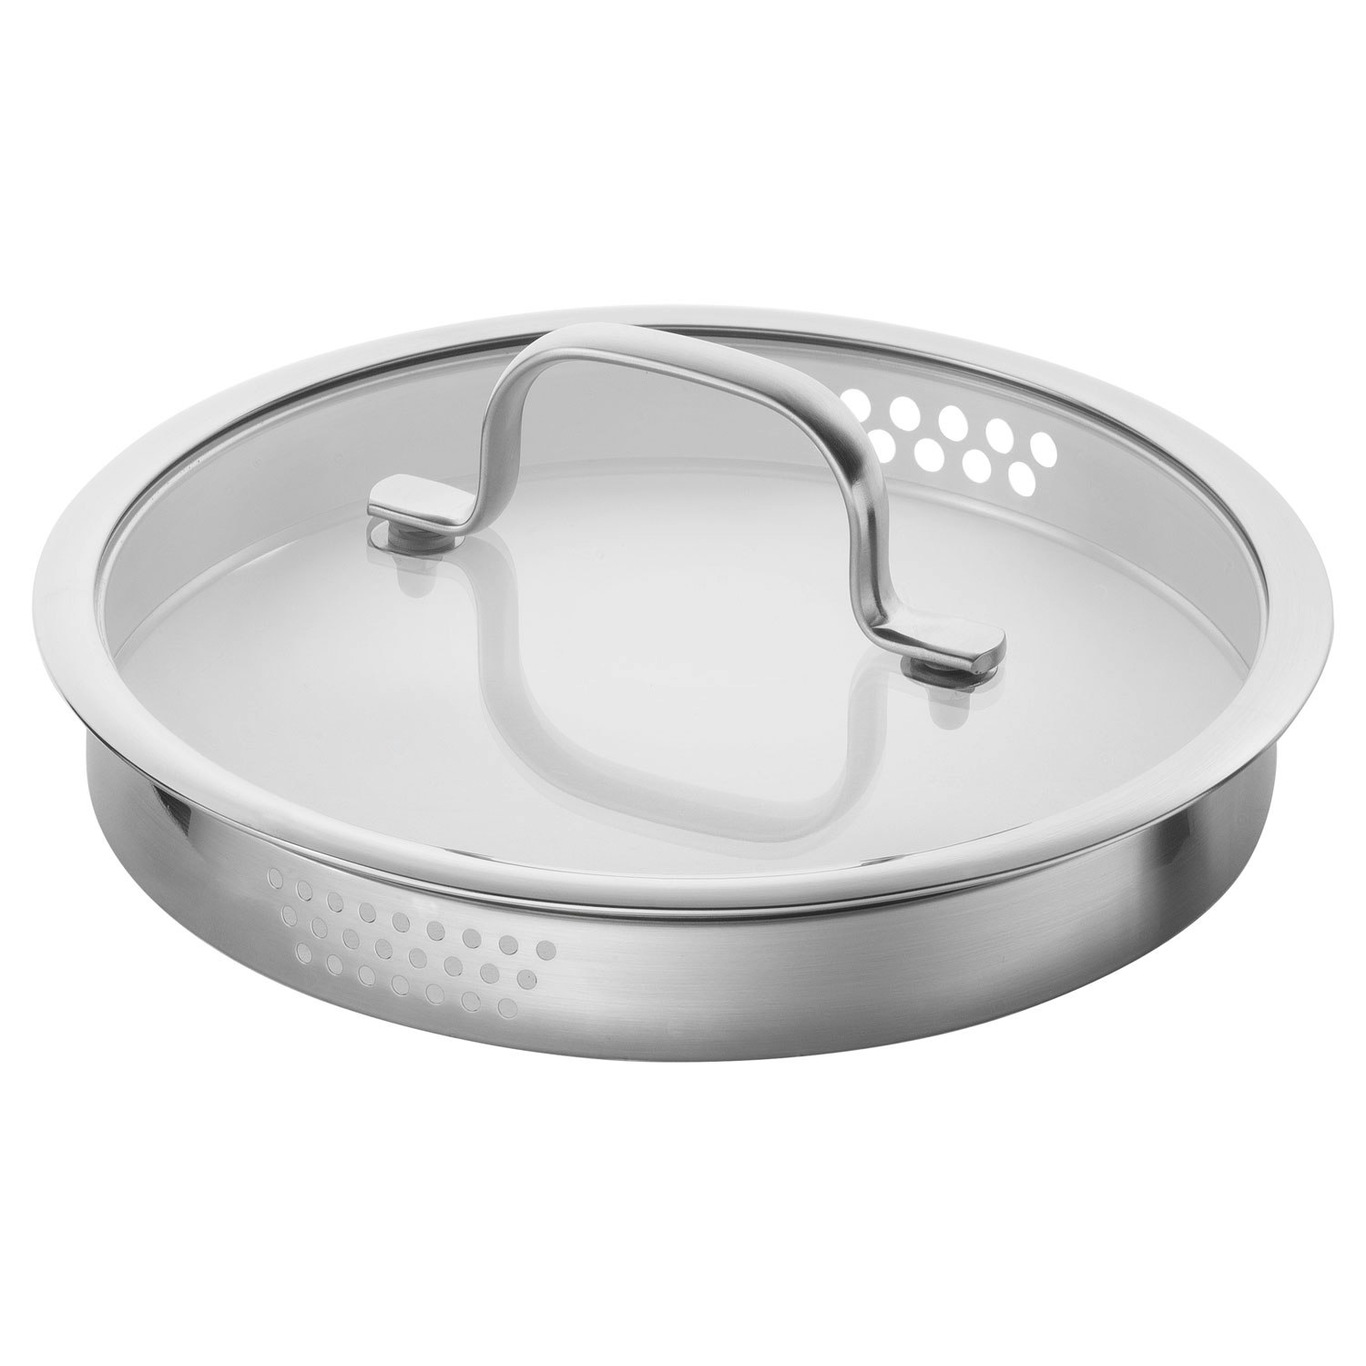 https://royaldesign.com/image/11/zwilling-true-flow-pot-set-stainless-steel-3-pieces-1?w=800&quality=80